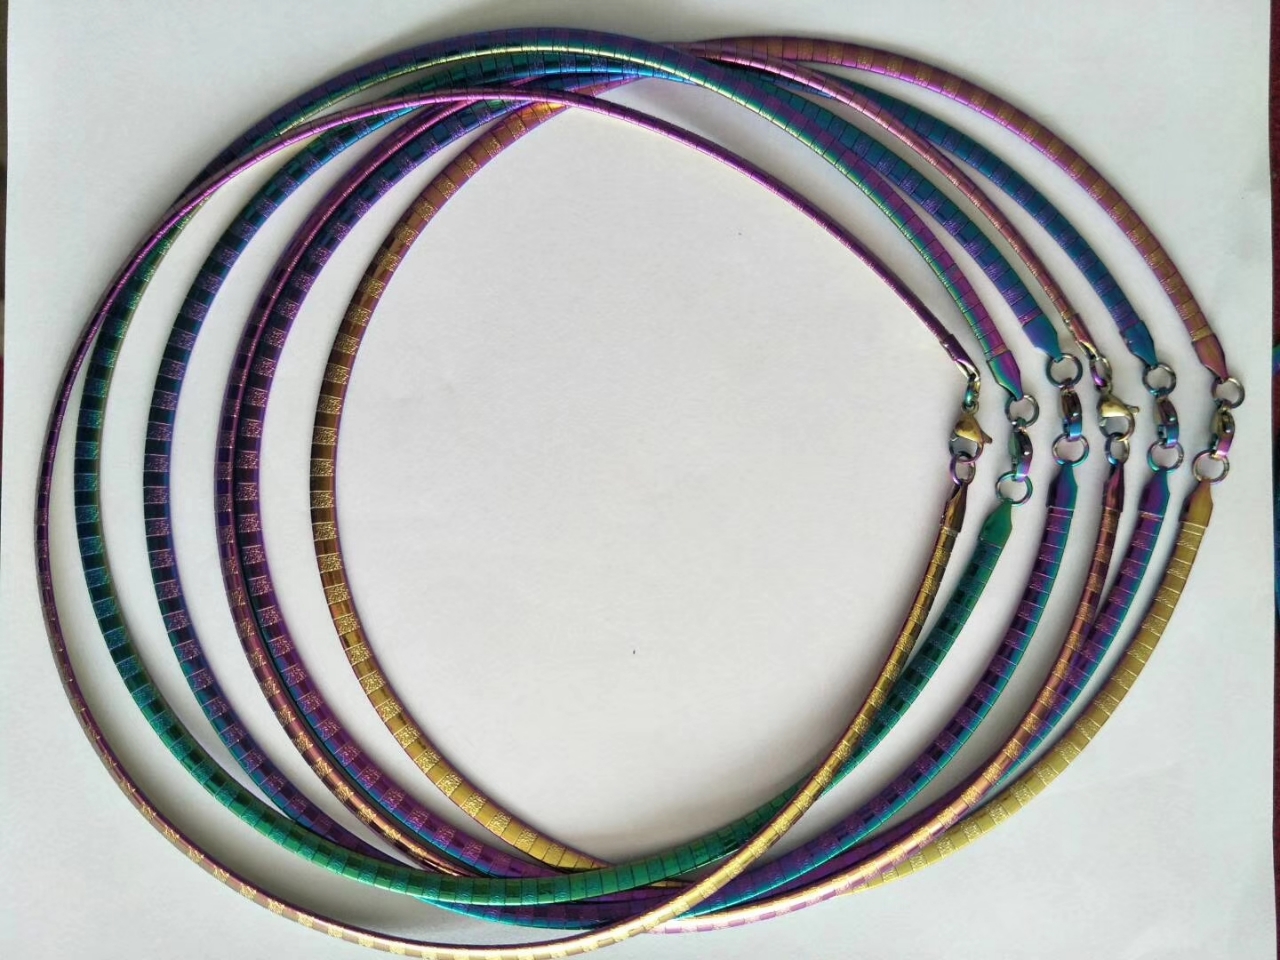 Stainless steel collar with colorful chain